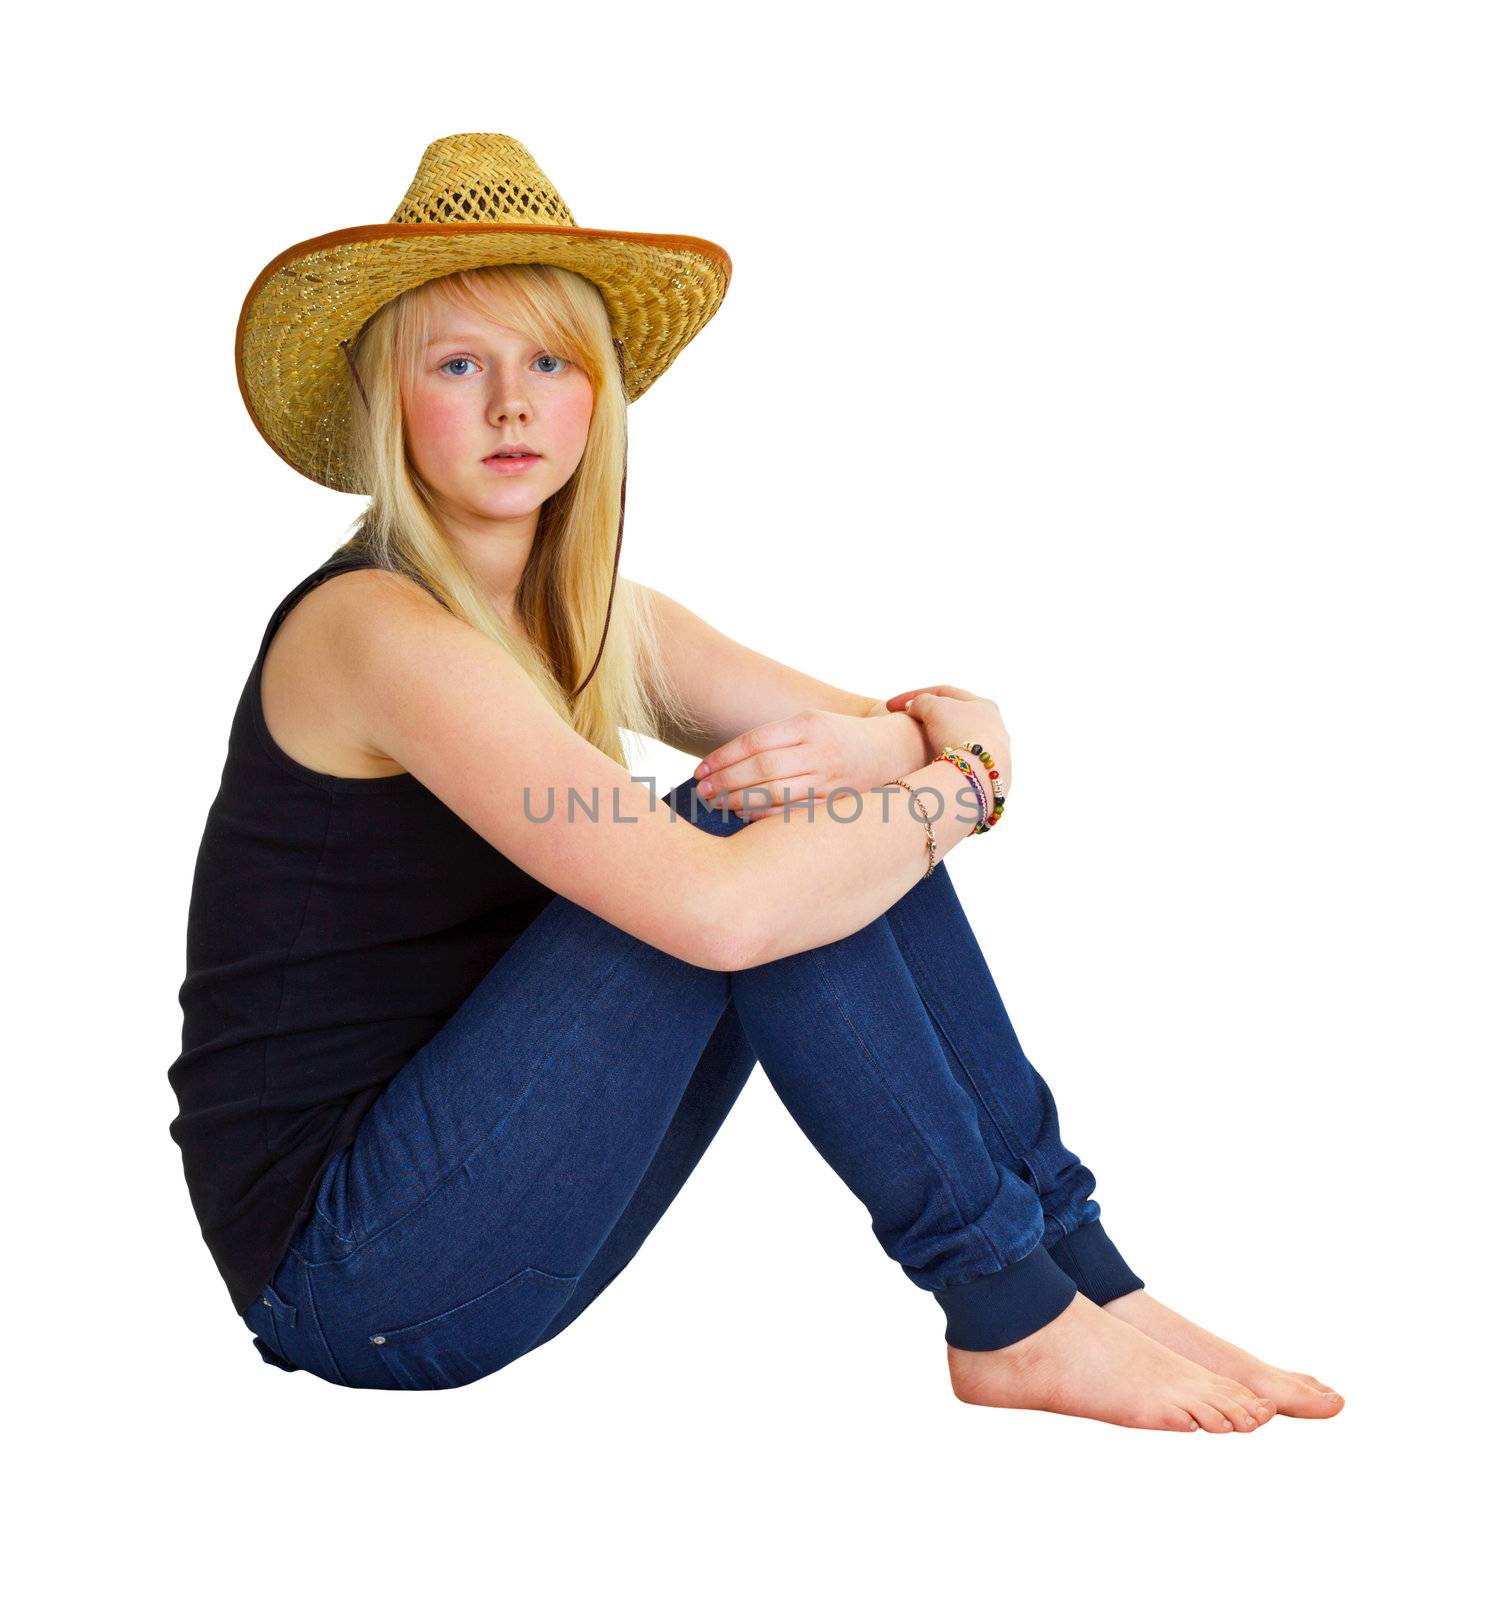 A young girl in a farmer dress sitting isolated on white background